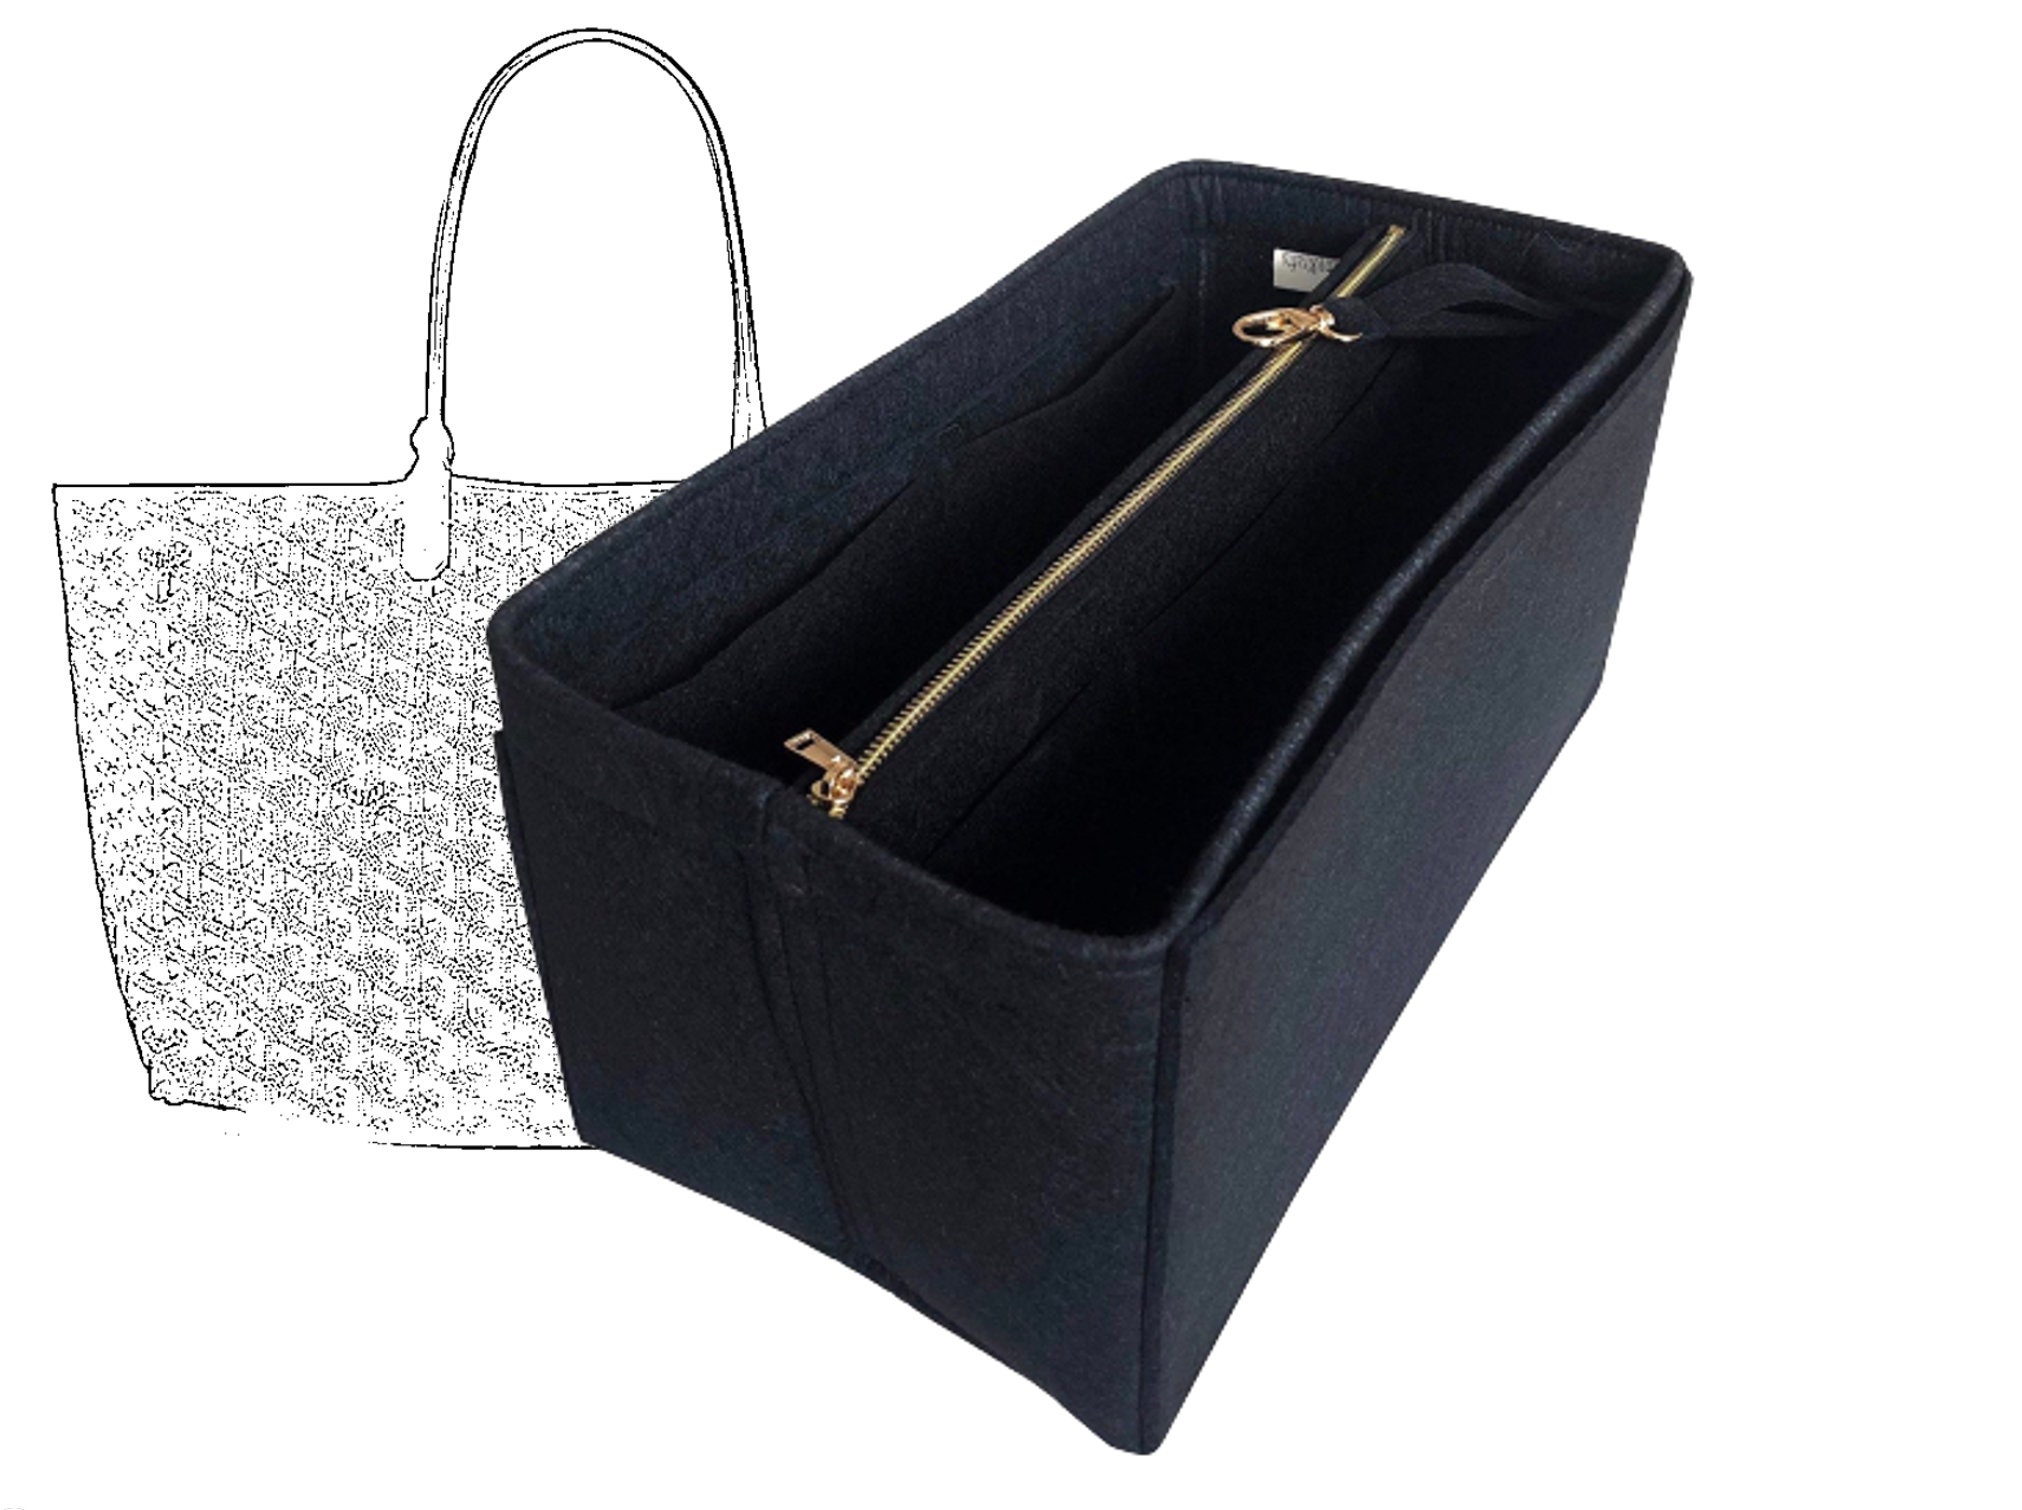 Tote Bag Organizer For Goyard Anjou GM Bag with Double Bottle Holders